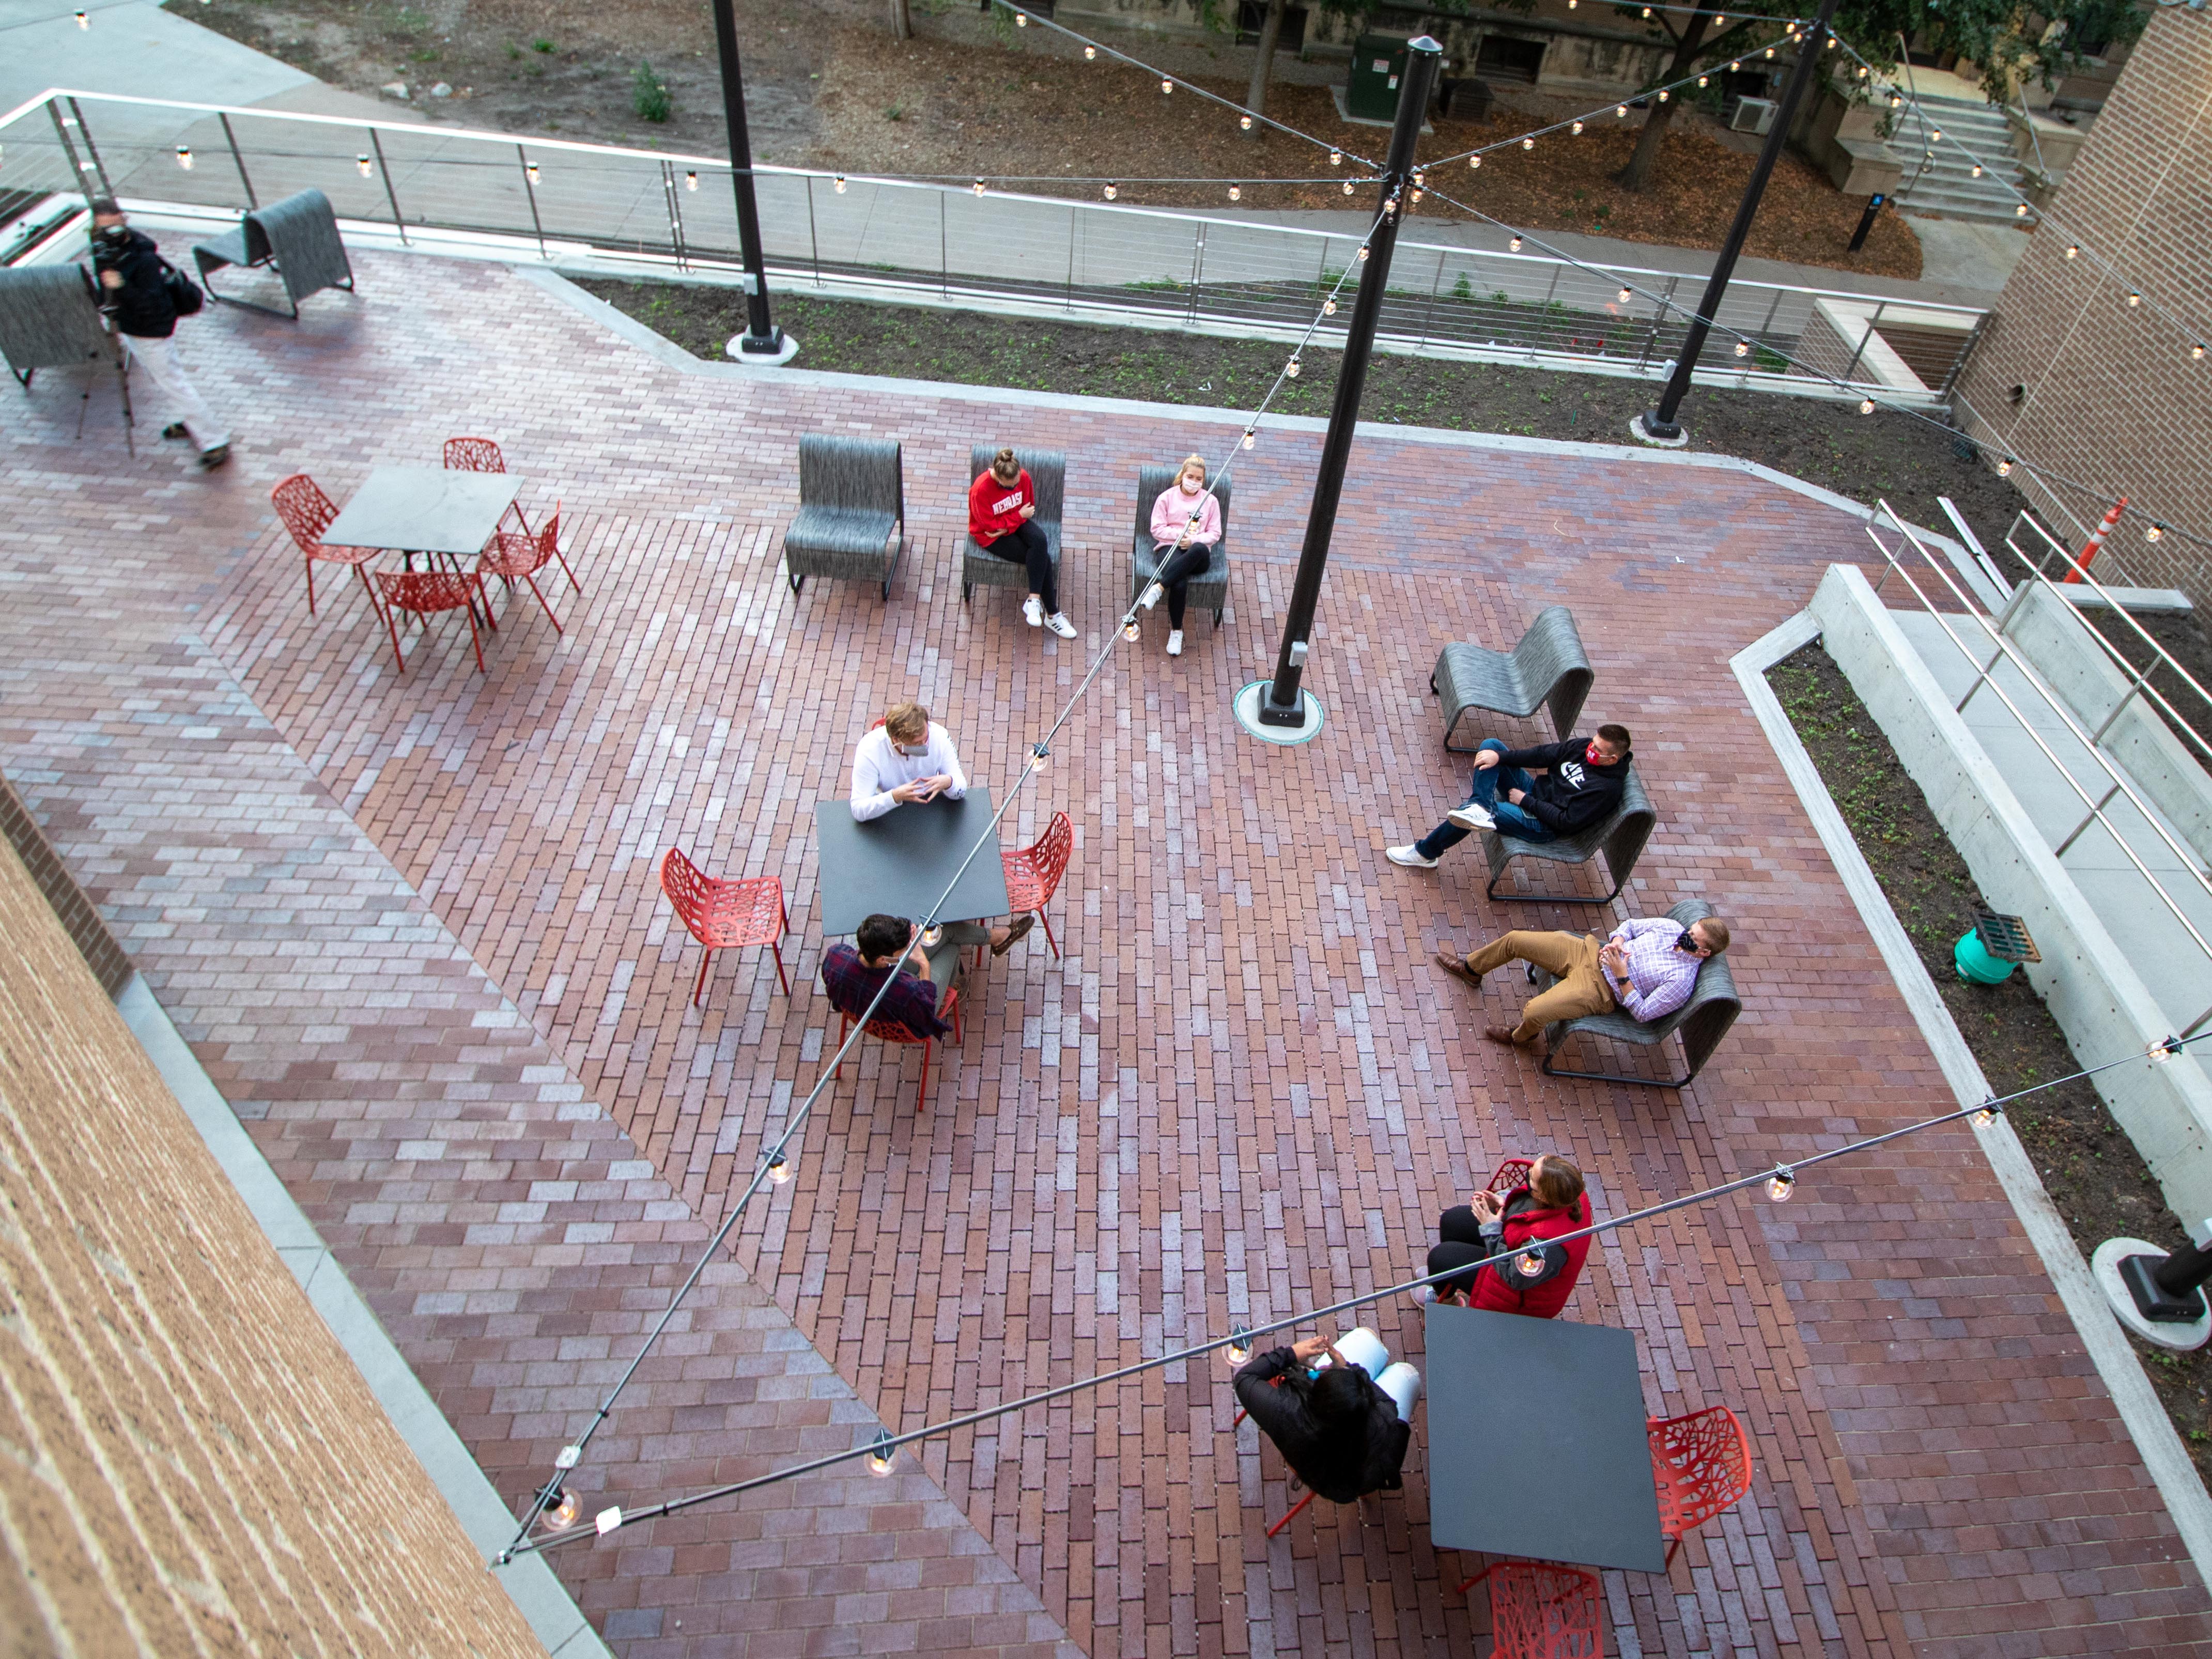 The recently-opened outdoor patio was a new addtion to the Nebraska East Union during it's recent major renovation.